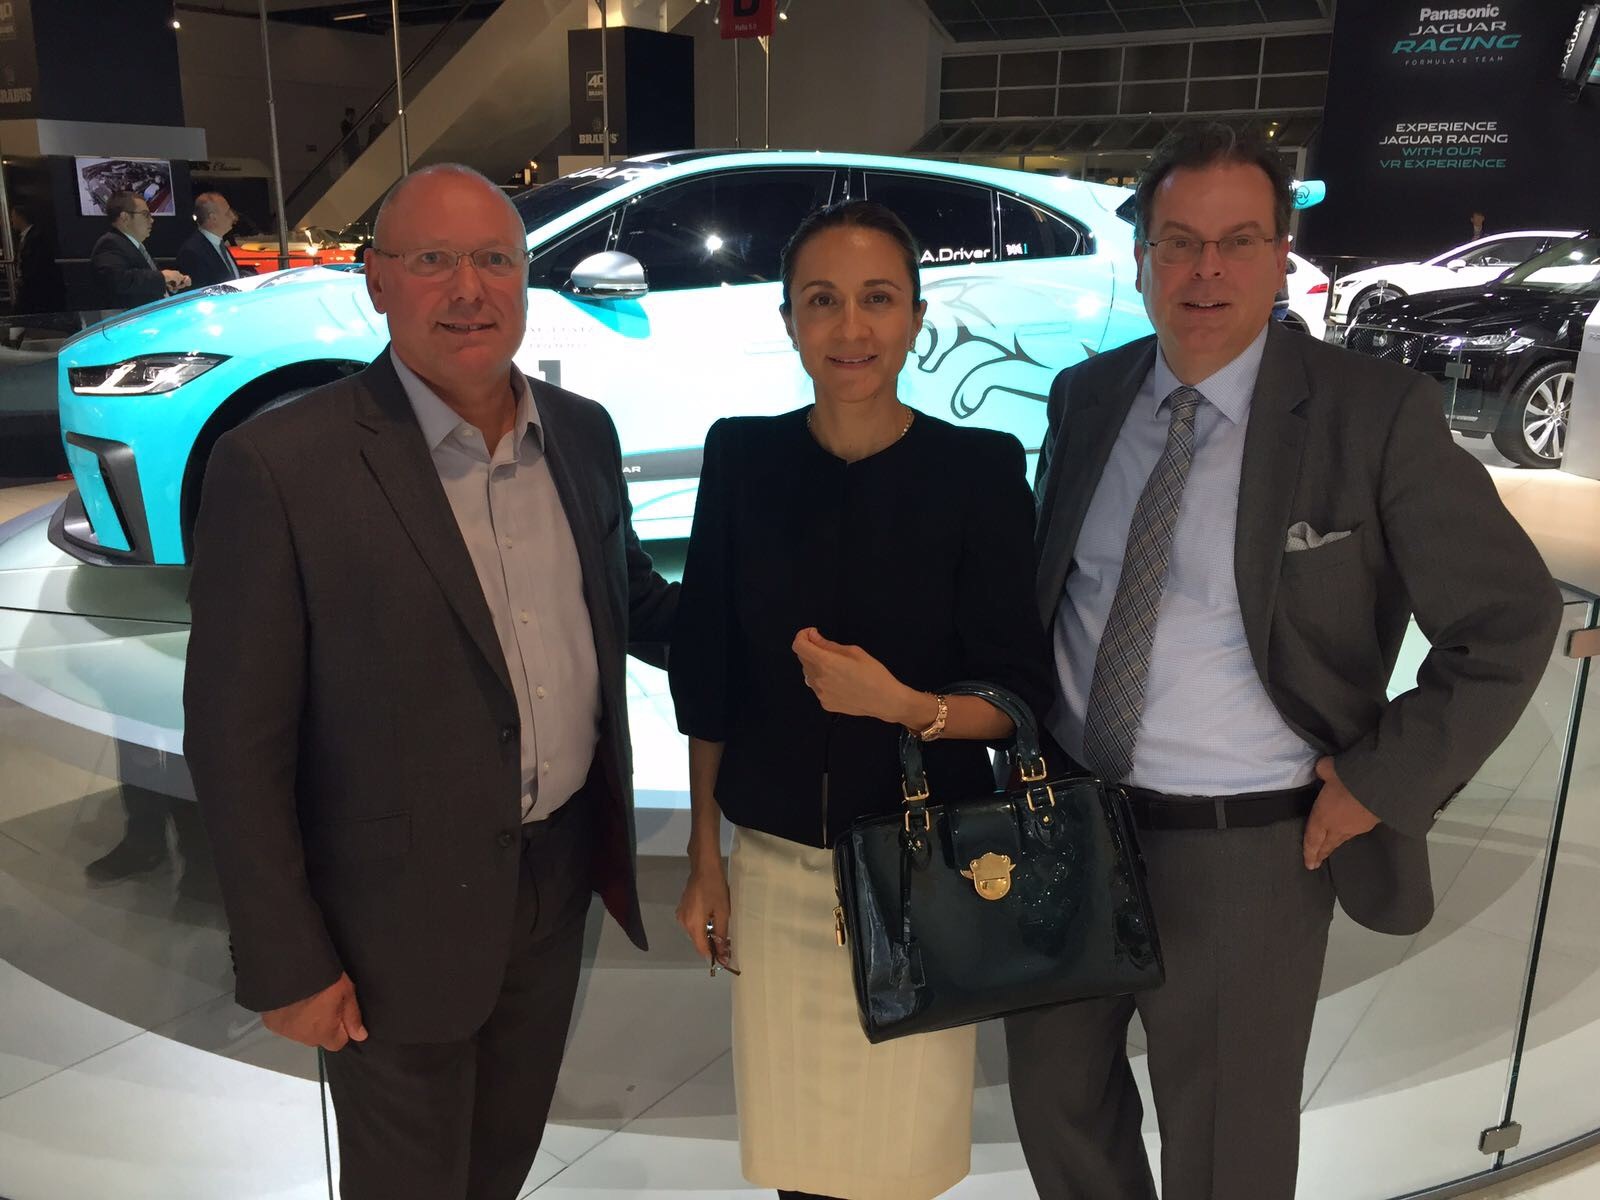 From left to right: The LIASE Group’s Adam Pumfrey, Managing Director U.K.; Vanessa Moriel, Managing Director Asia; and Wolfgang Doell, President and Managing Director Europe at the Jaguar Booth.